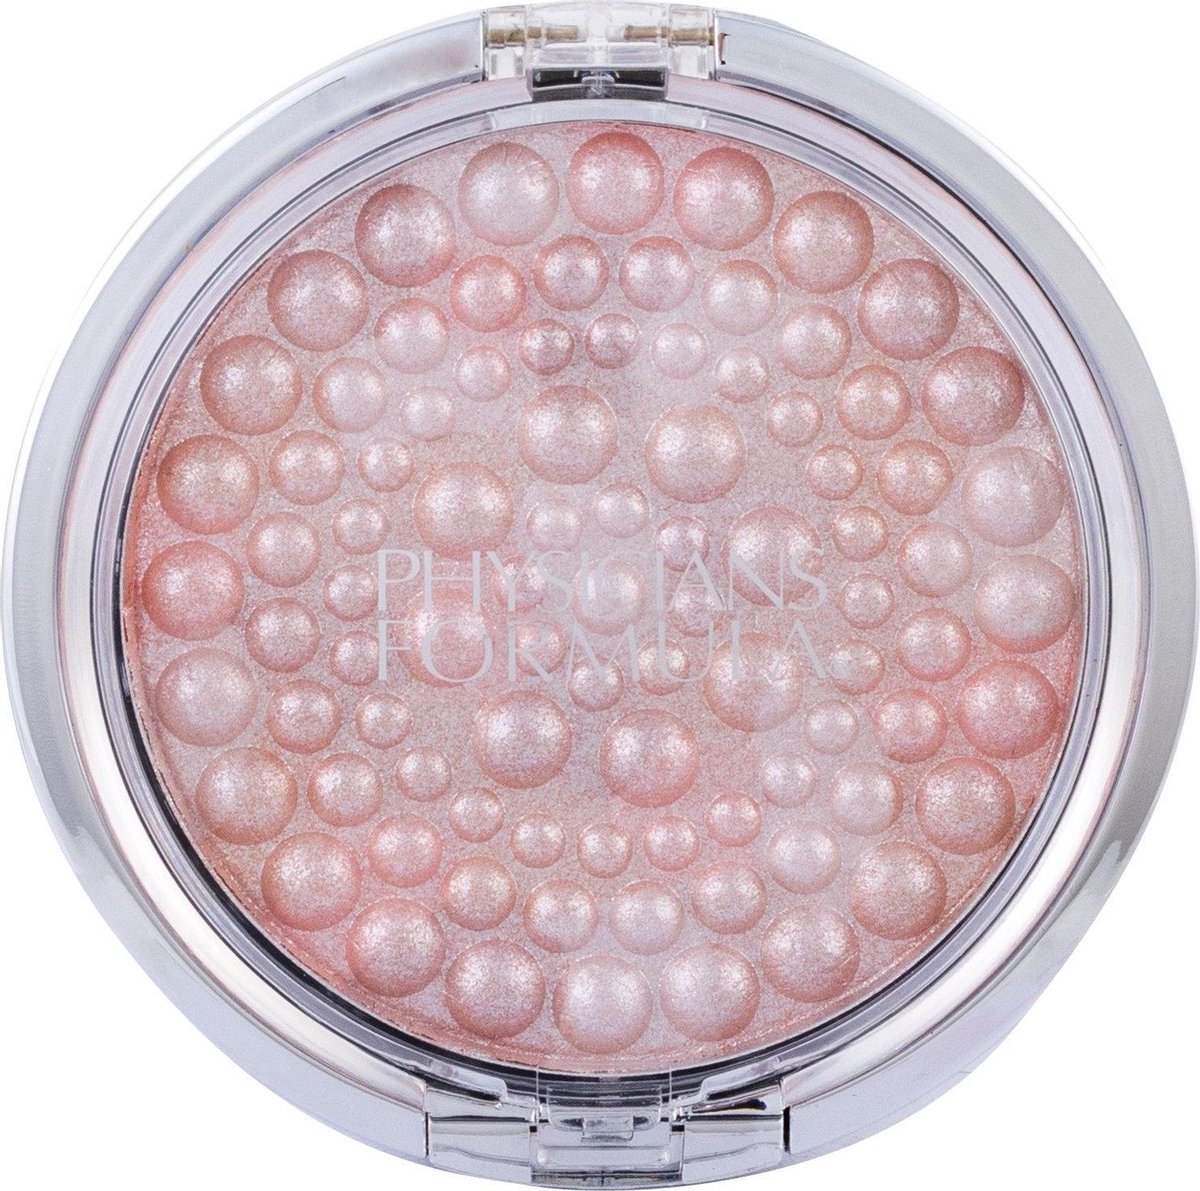 Physicians Formula Powder Palette Mineral Glow Pearls - 7040 Translucent Pearl